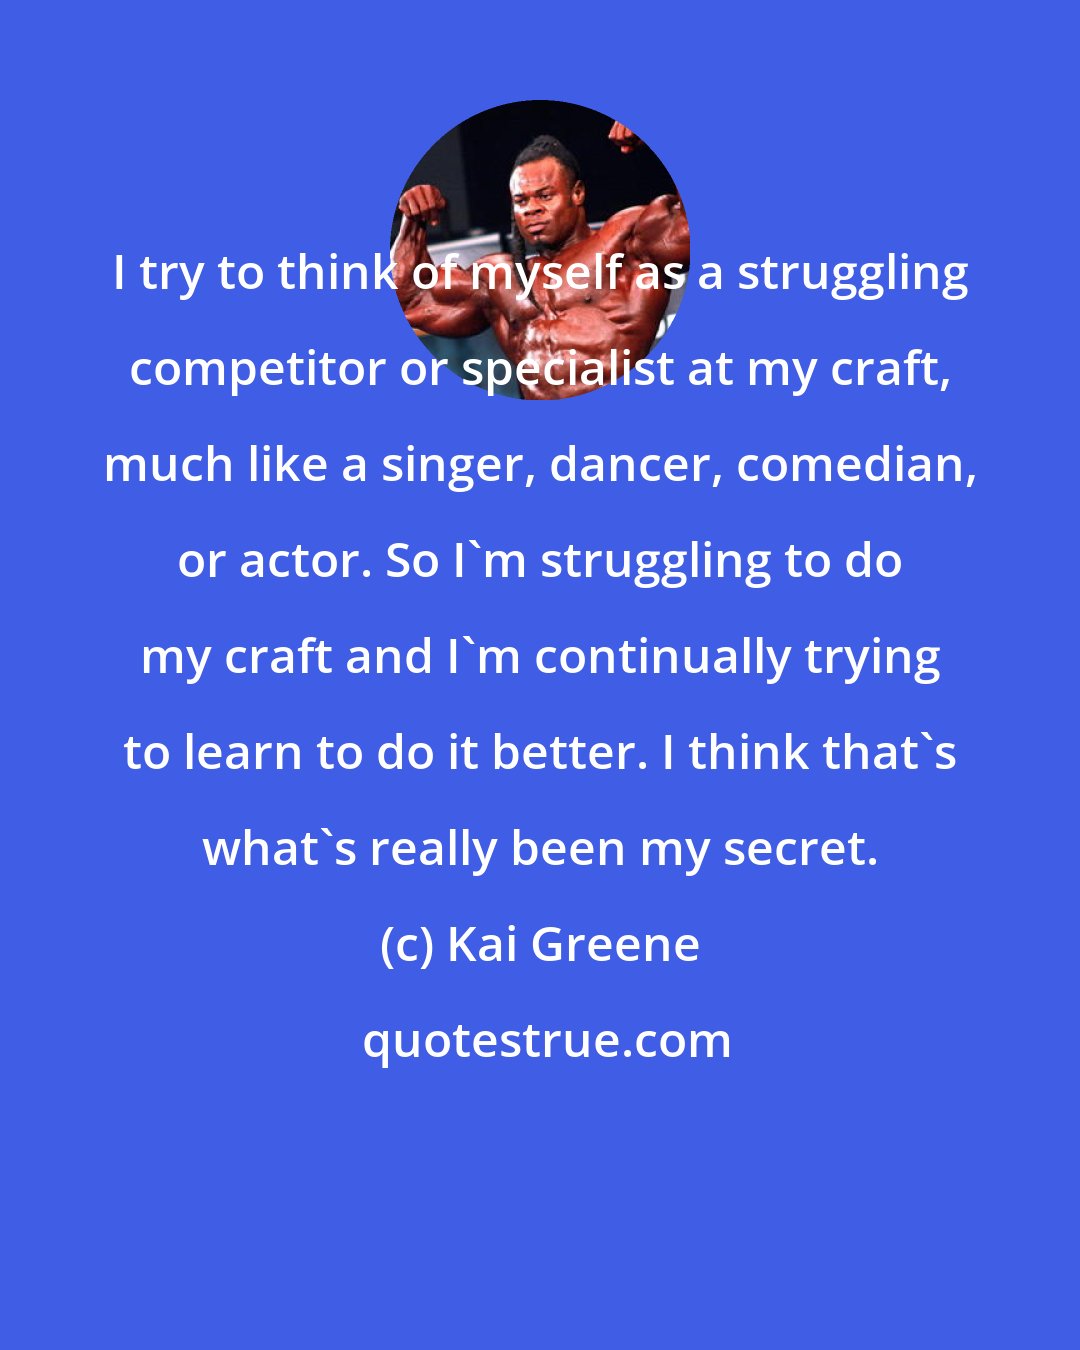 Kai Greene: I try to think of myself as a struggling competitor or specialist at my craft, much like a singer, dancer, comedian, or actor. So I'm struggling to do my craft and I'm continually trying to learn to do it better. I think that's what's really been my secret.